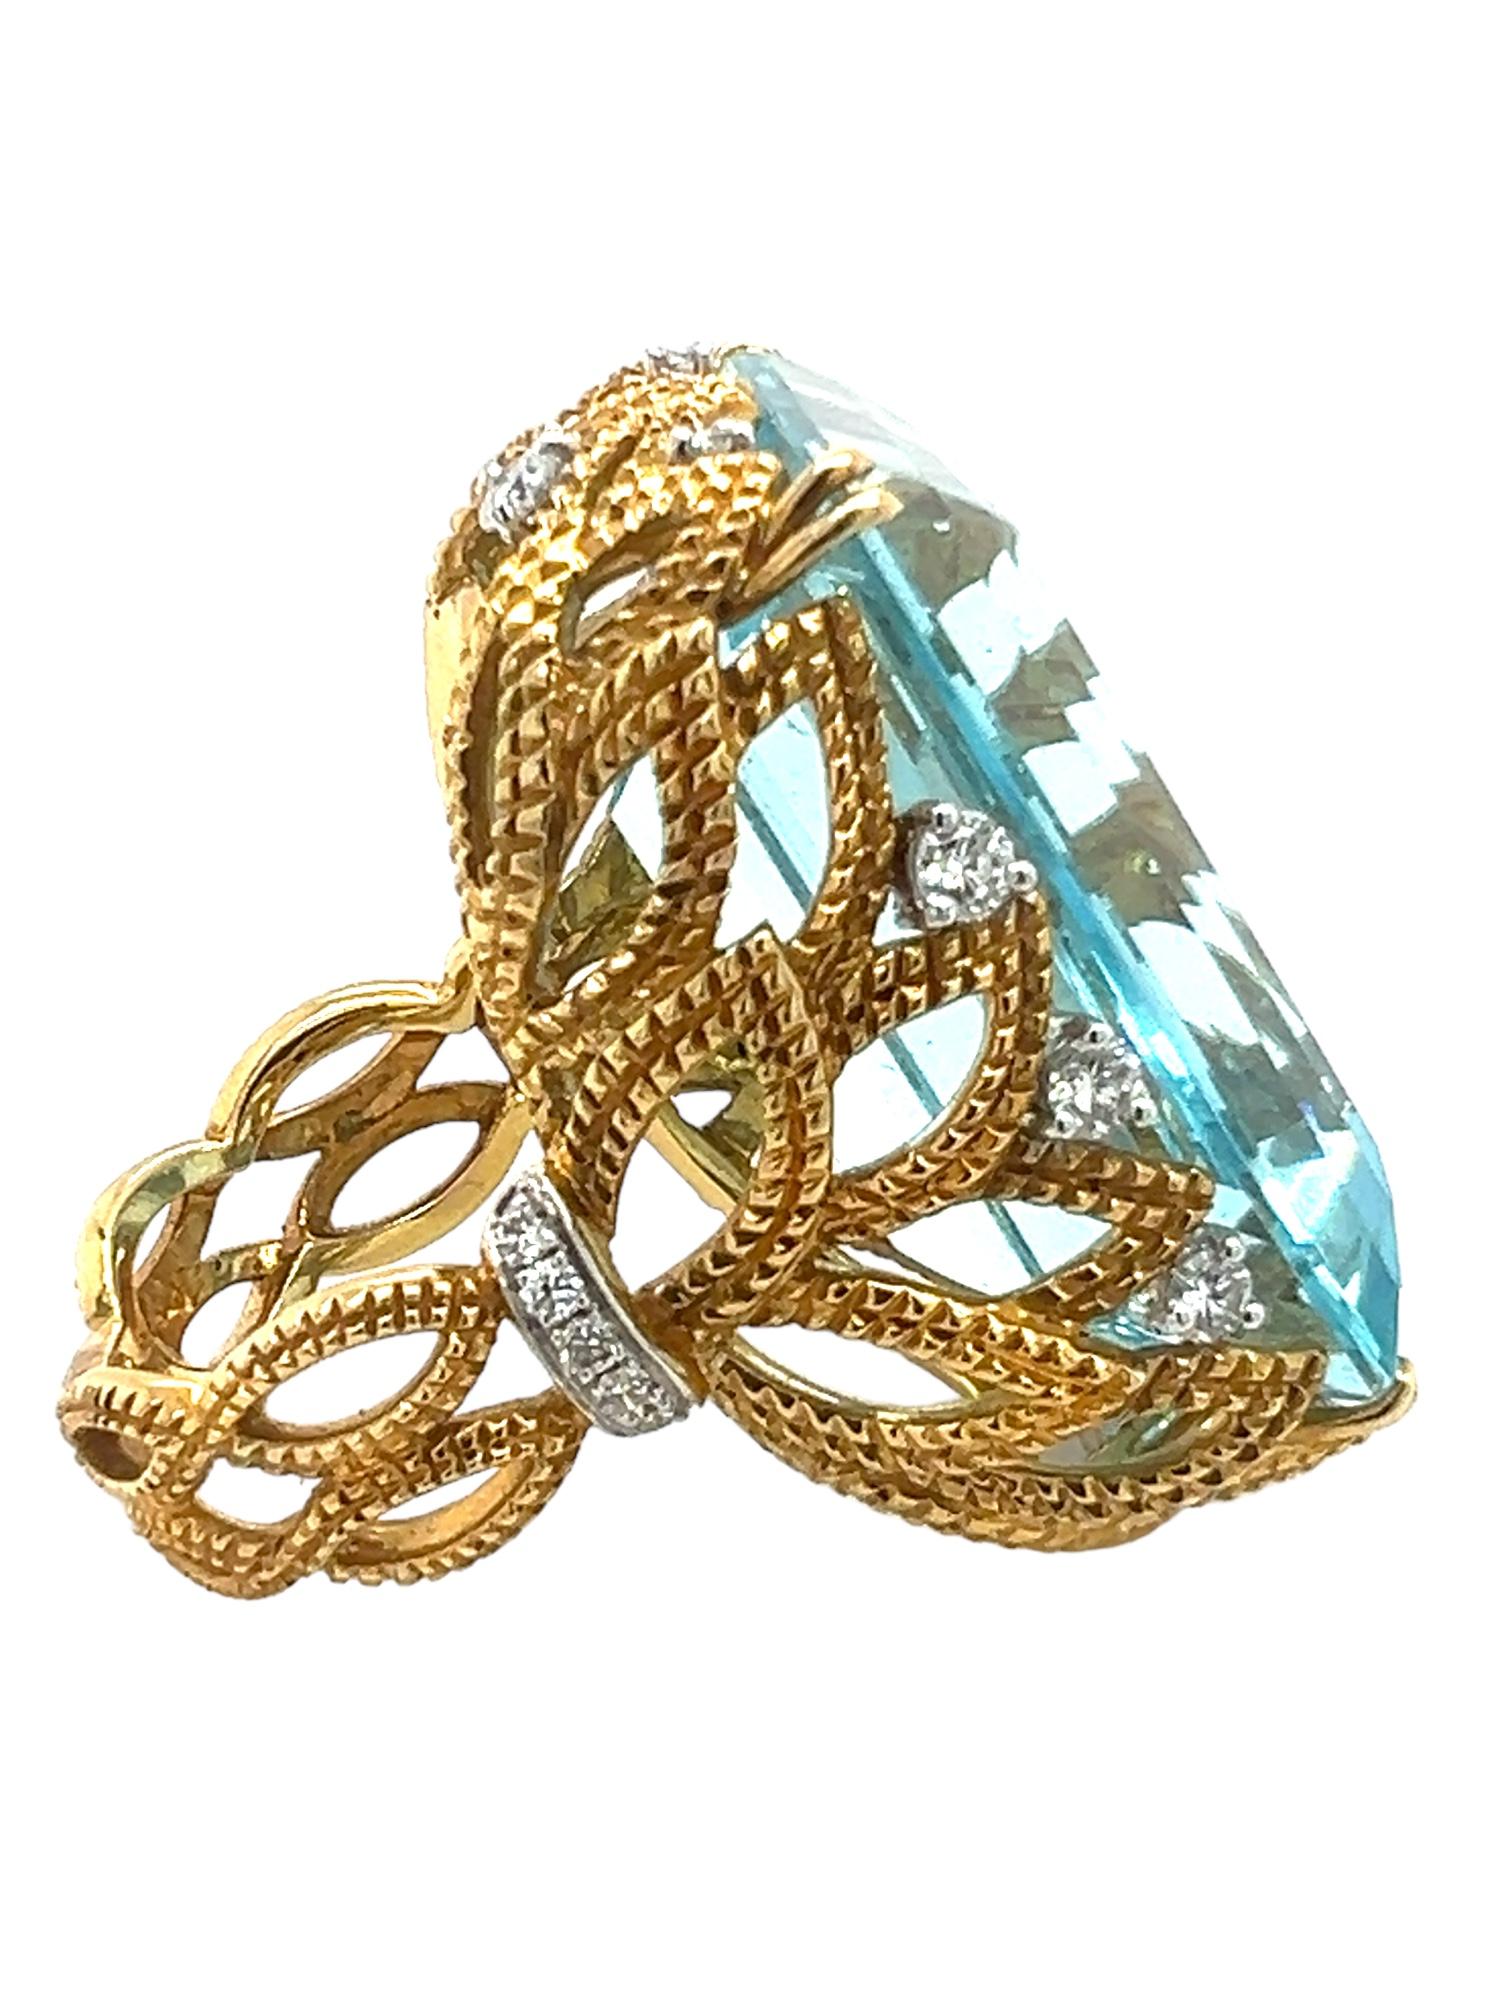 Sophia D. 42.59 Carat Aquamarine Ring In New Condition For Sale In New York, NY